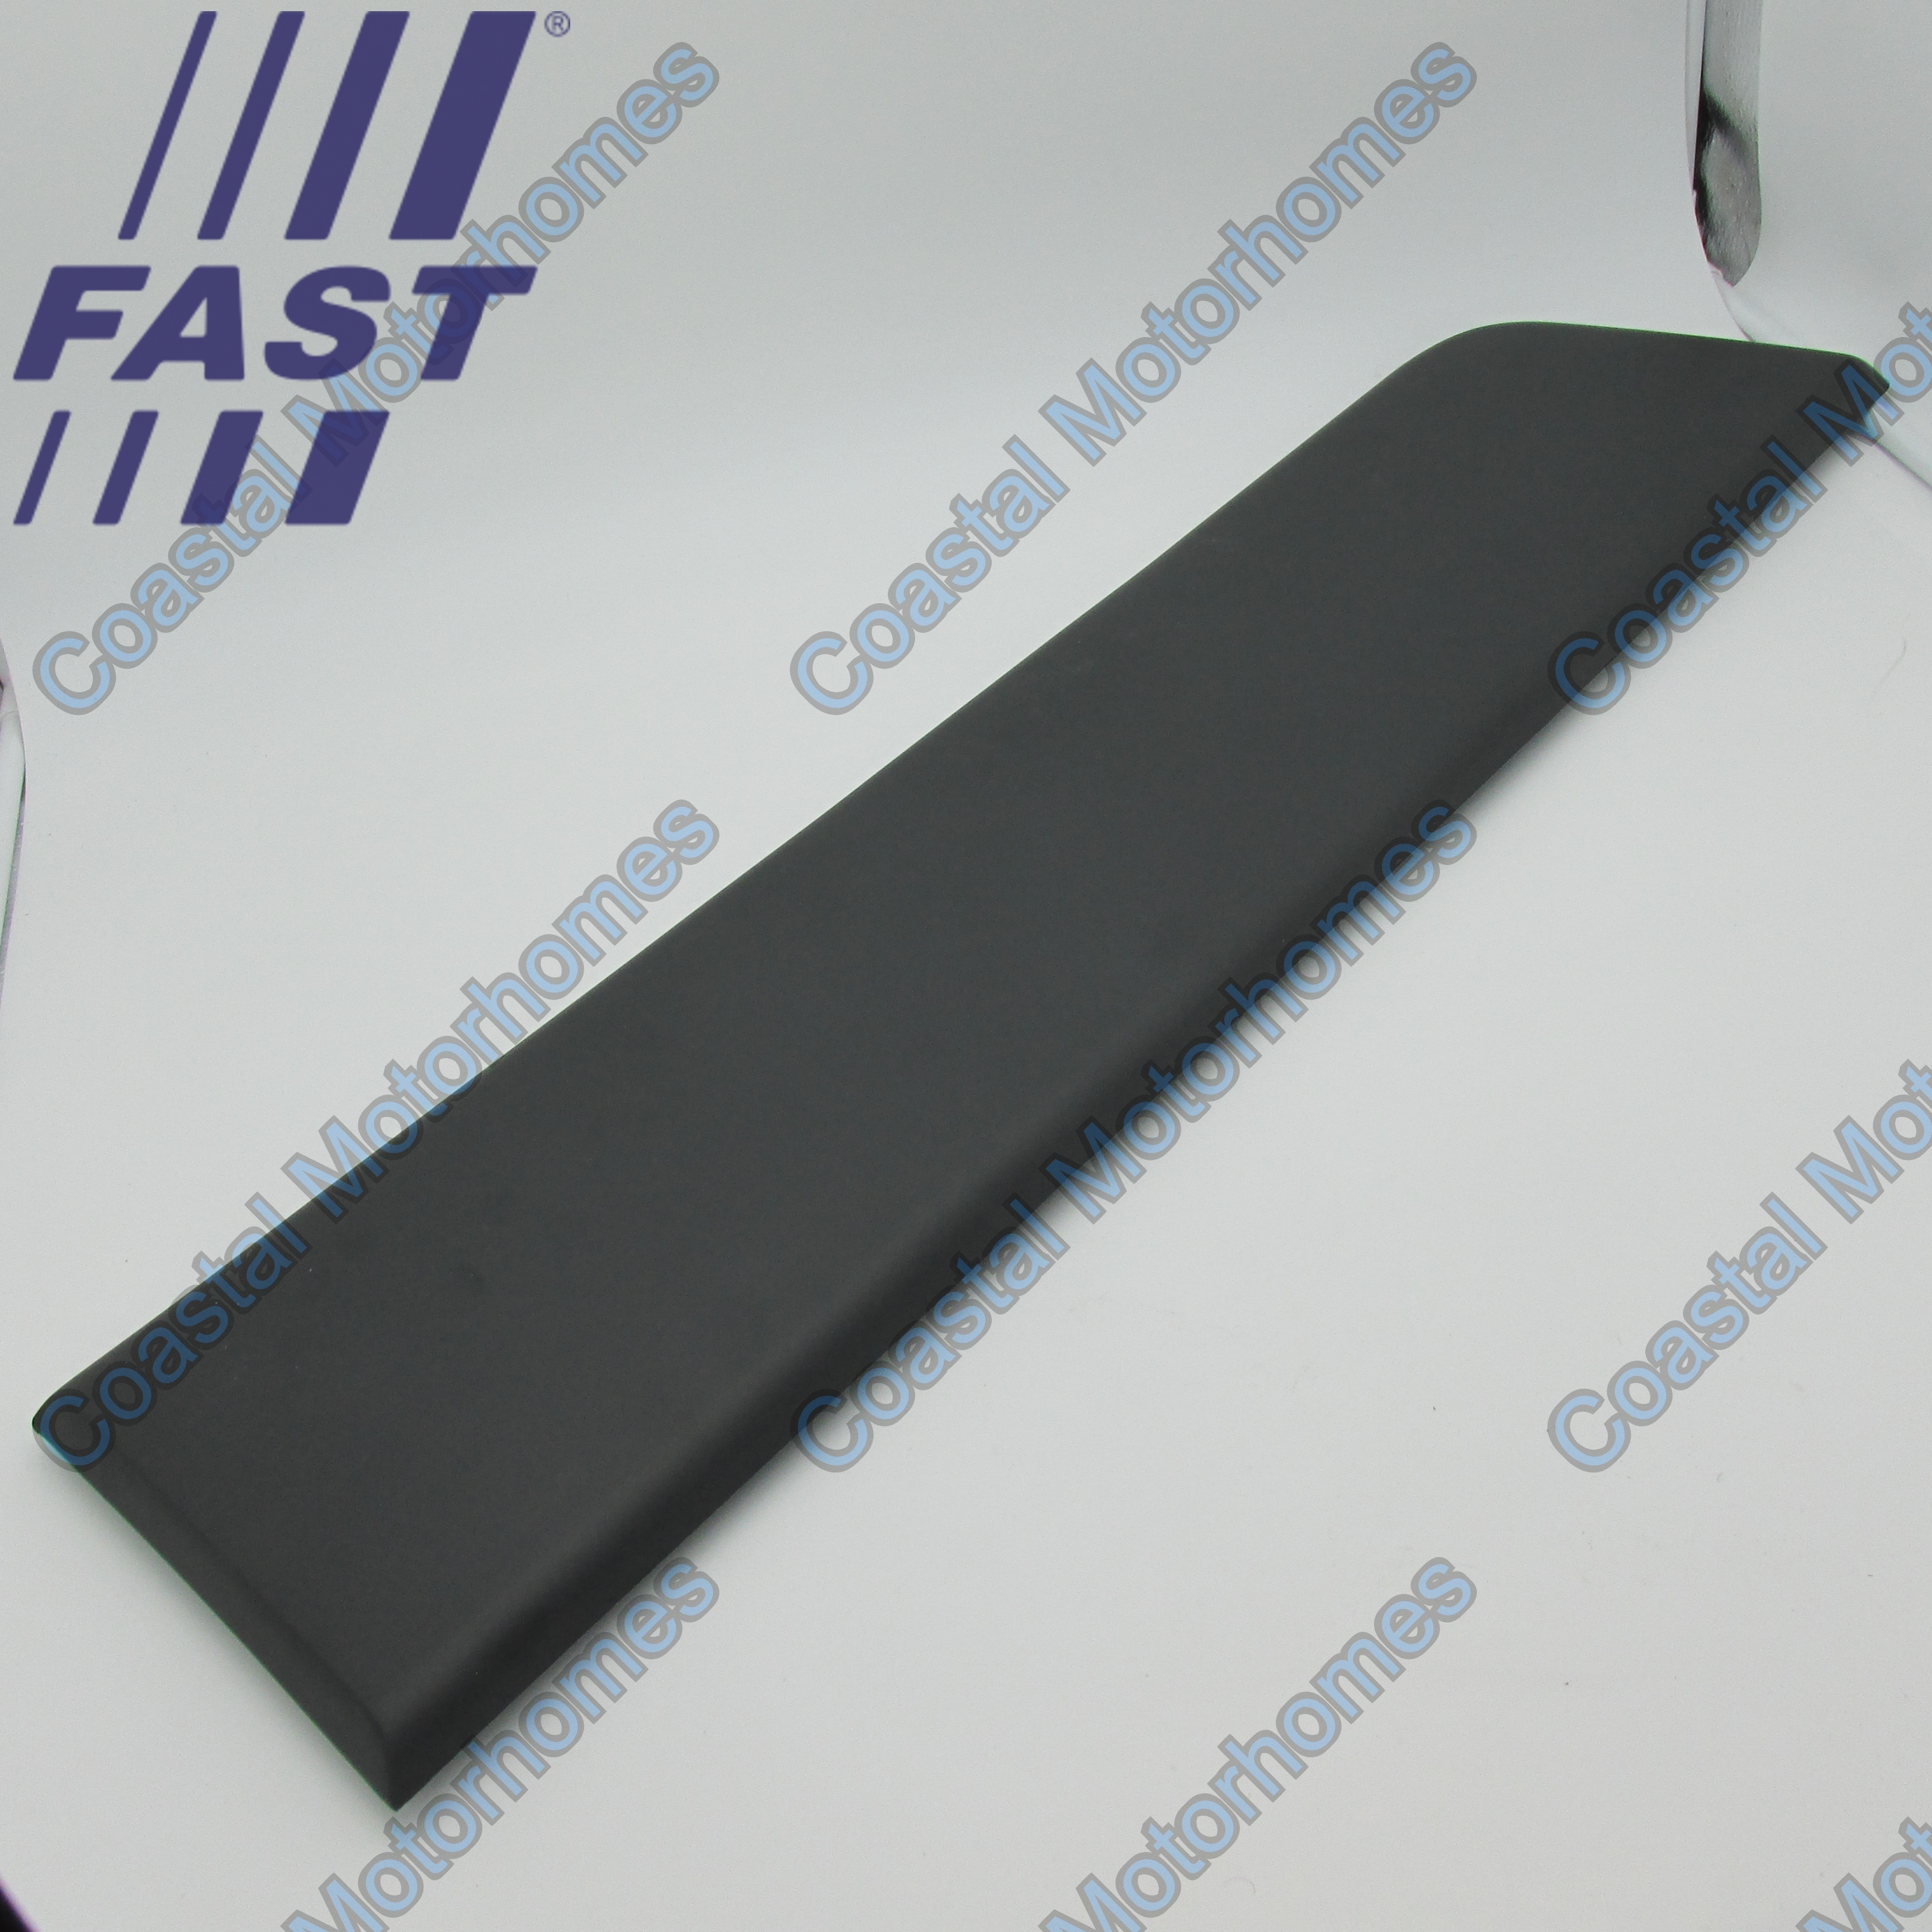 Relay Boxer Ducato Rear Right Trim Moulding Panel LWB O/S 735422845 